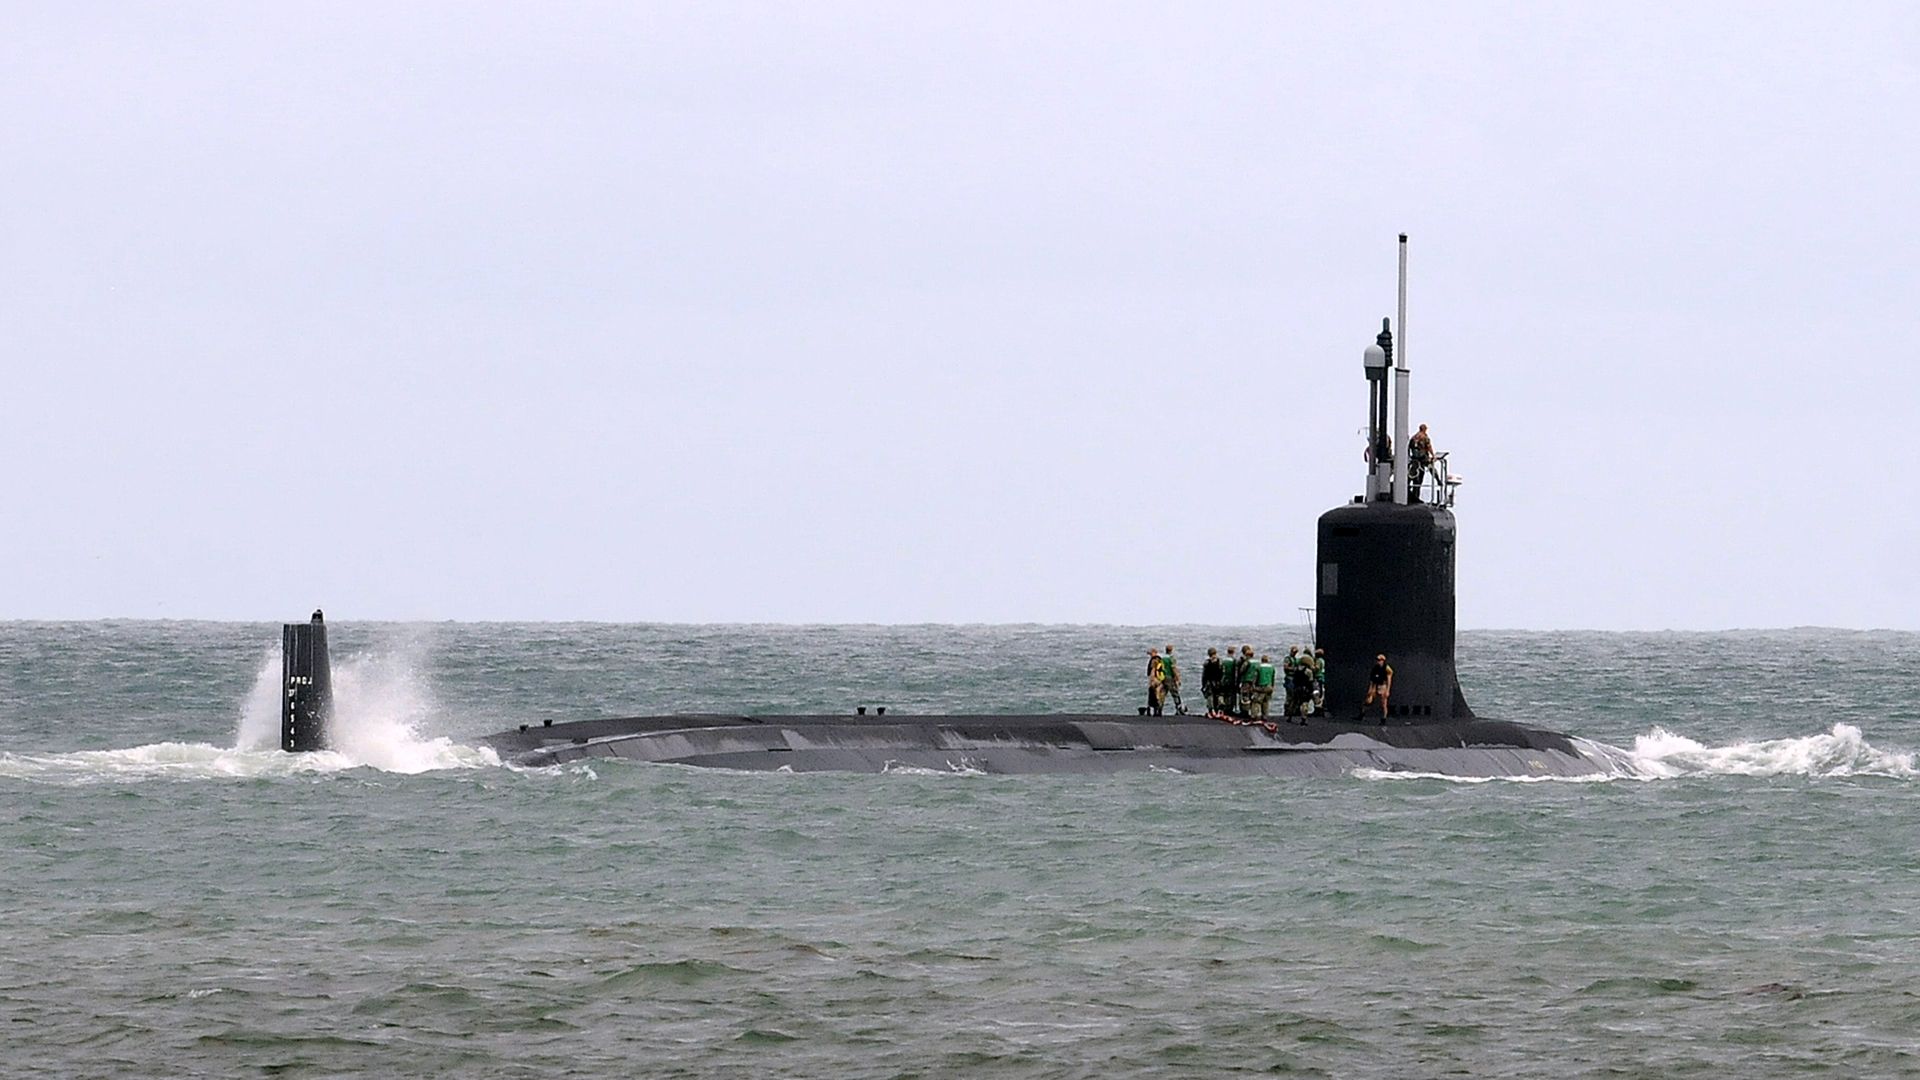 The USS Indiana, a nuclear powered United States Navy Virginia-class fast attack submarine